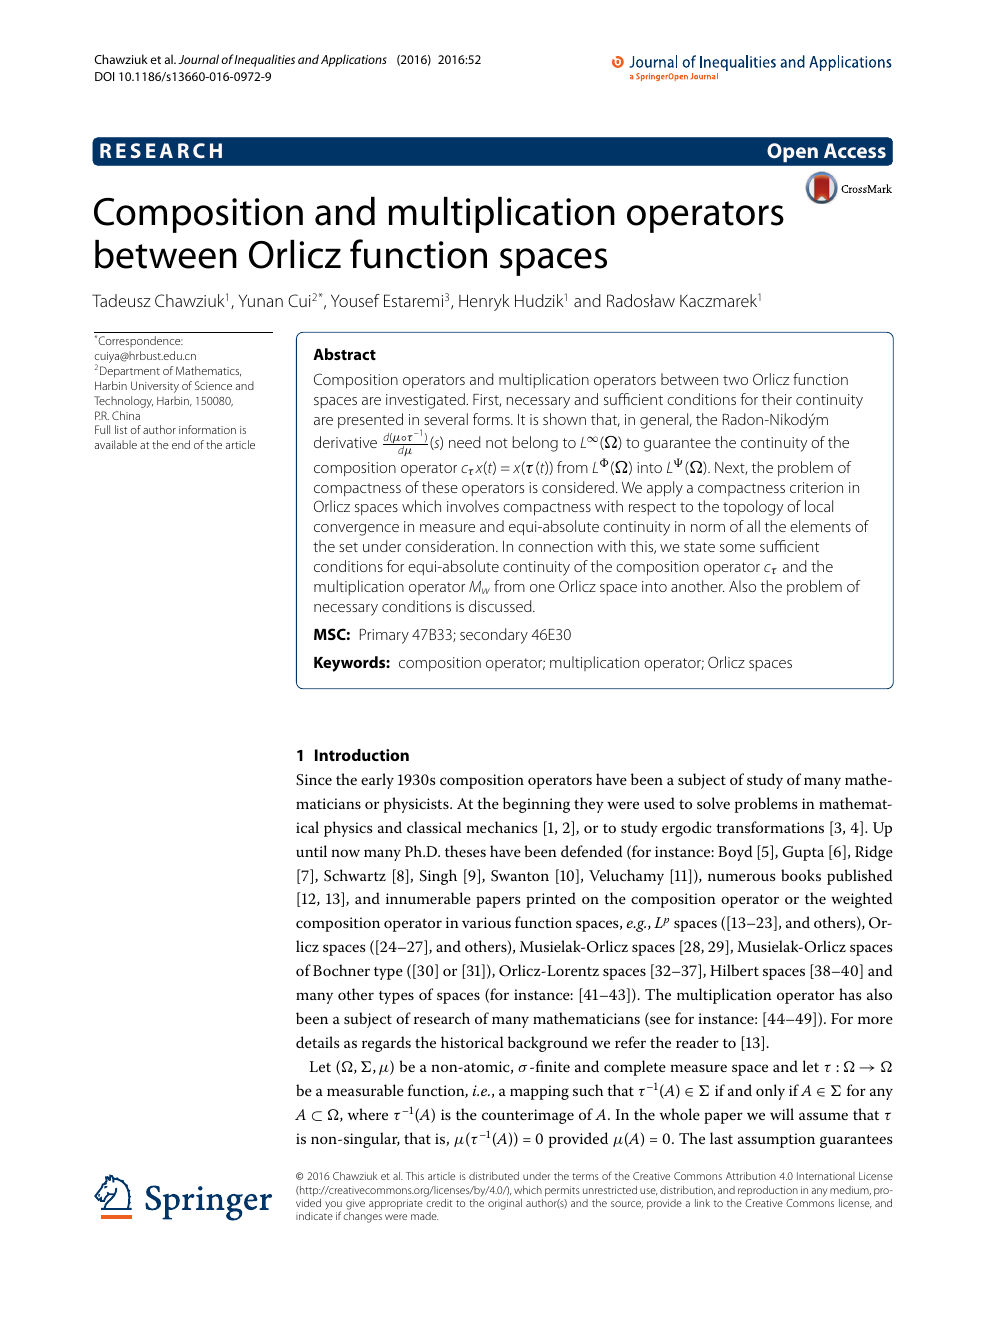 Composition And Multiplication Operators Between Orlicz Function Spaces Topic Of Research Paper In Mathematics Download Scholarly Article Pdf And Read For Free On Cyberleninka Open Science Hub